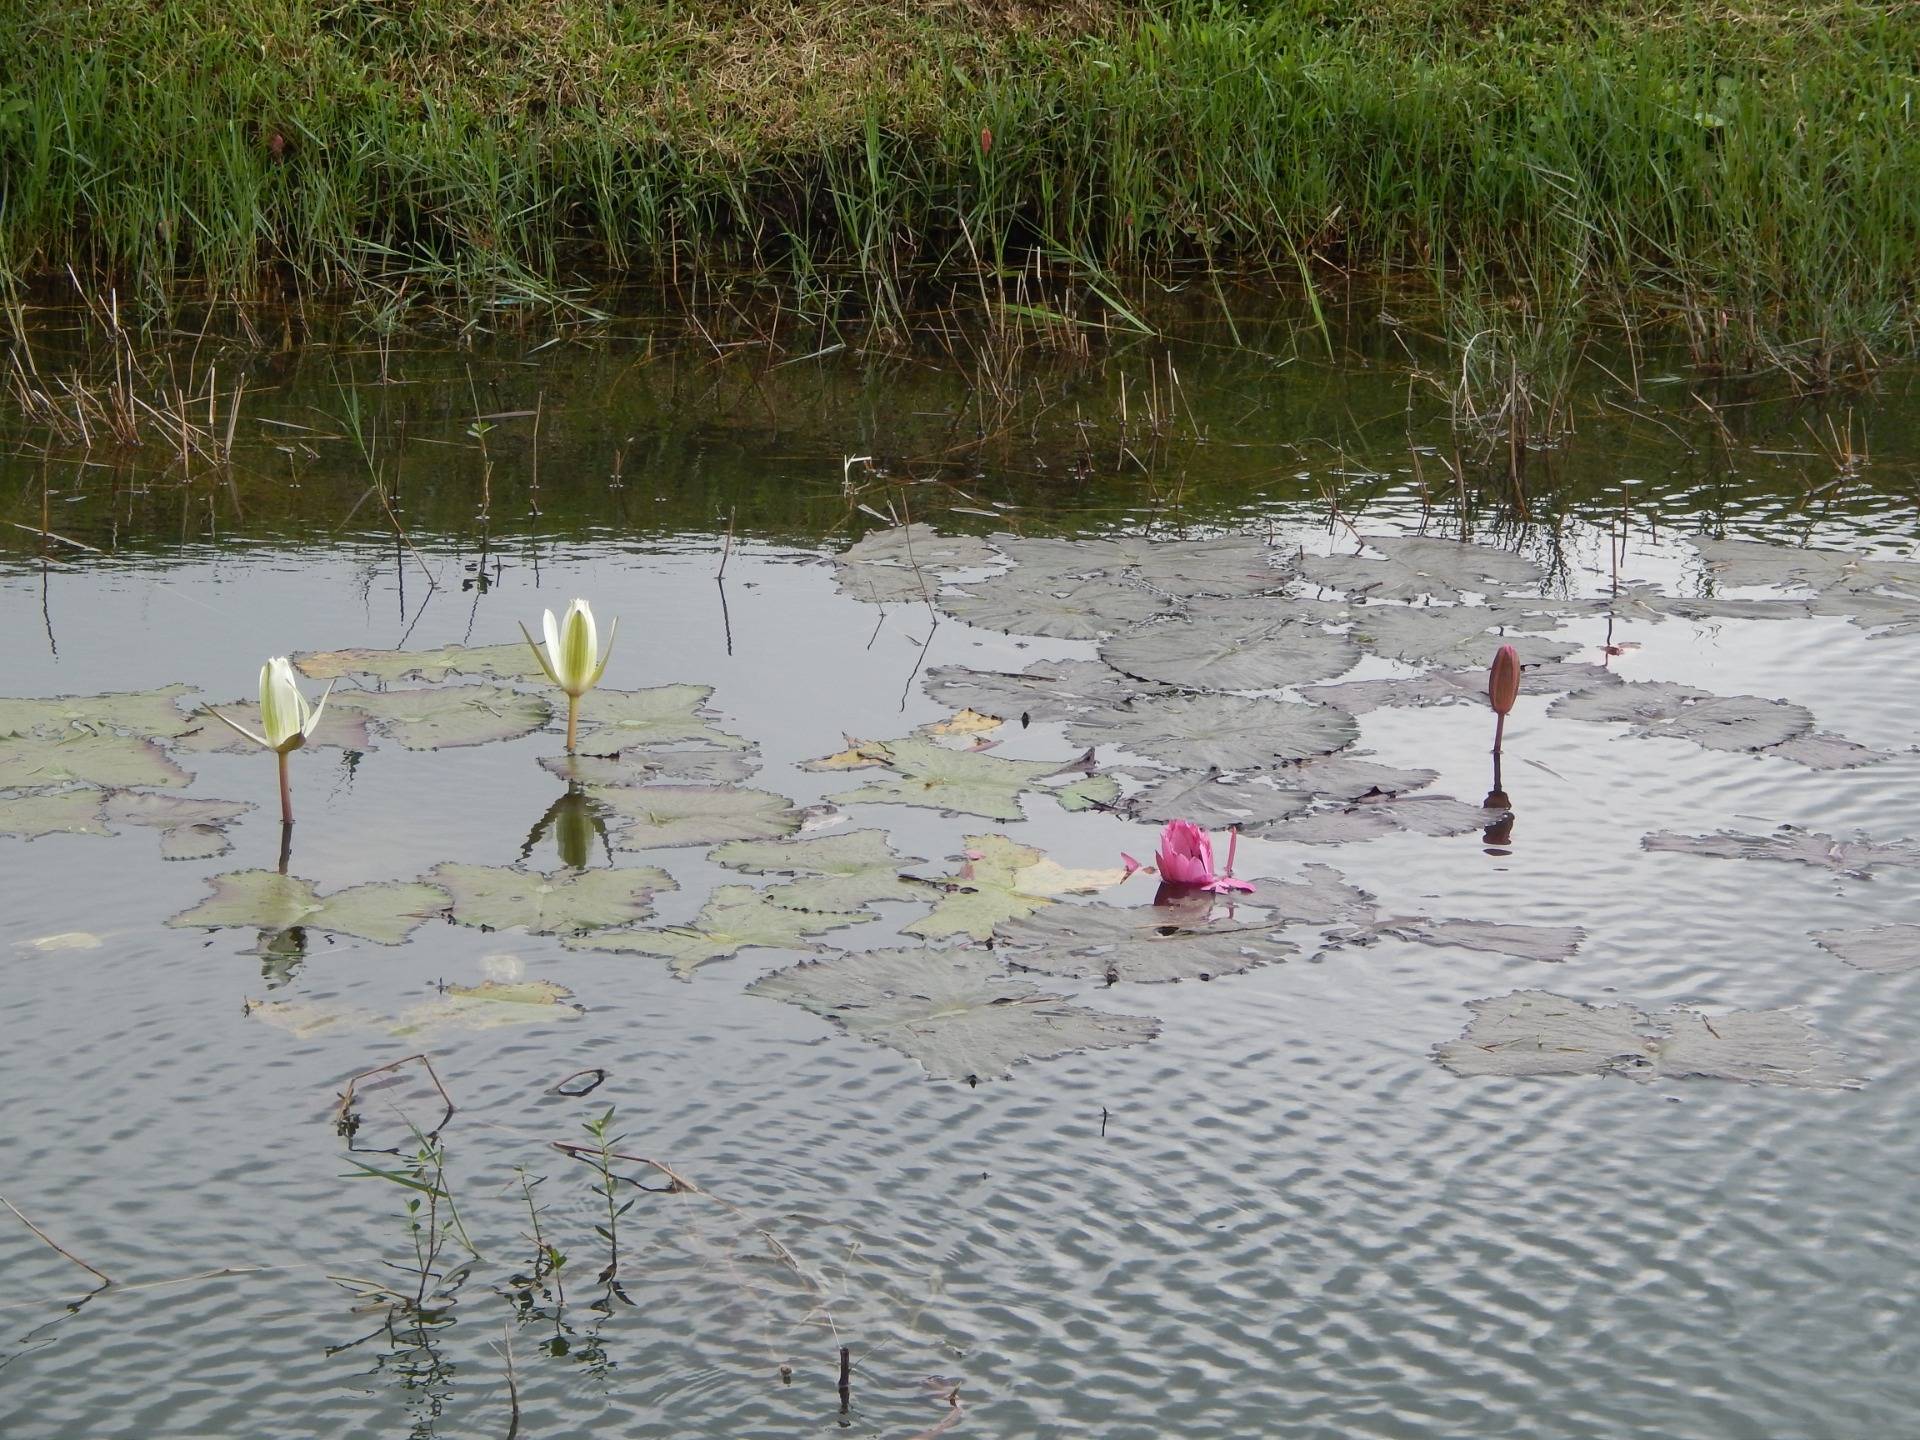 Flowering from the ponds. I think we are talking about the Lotus flowers but I’m not too sure.